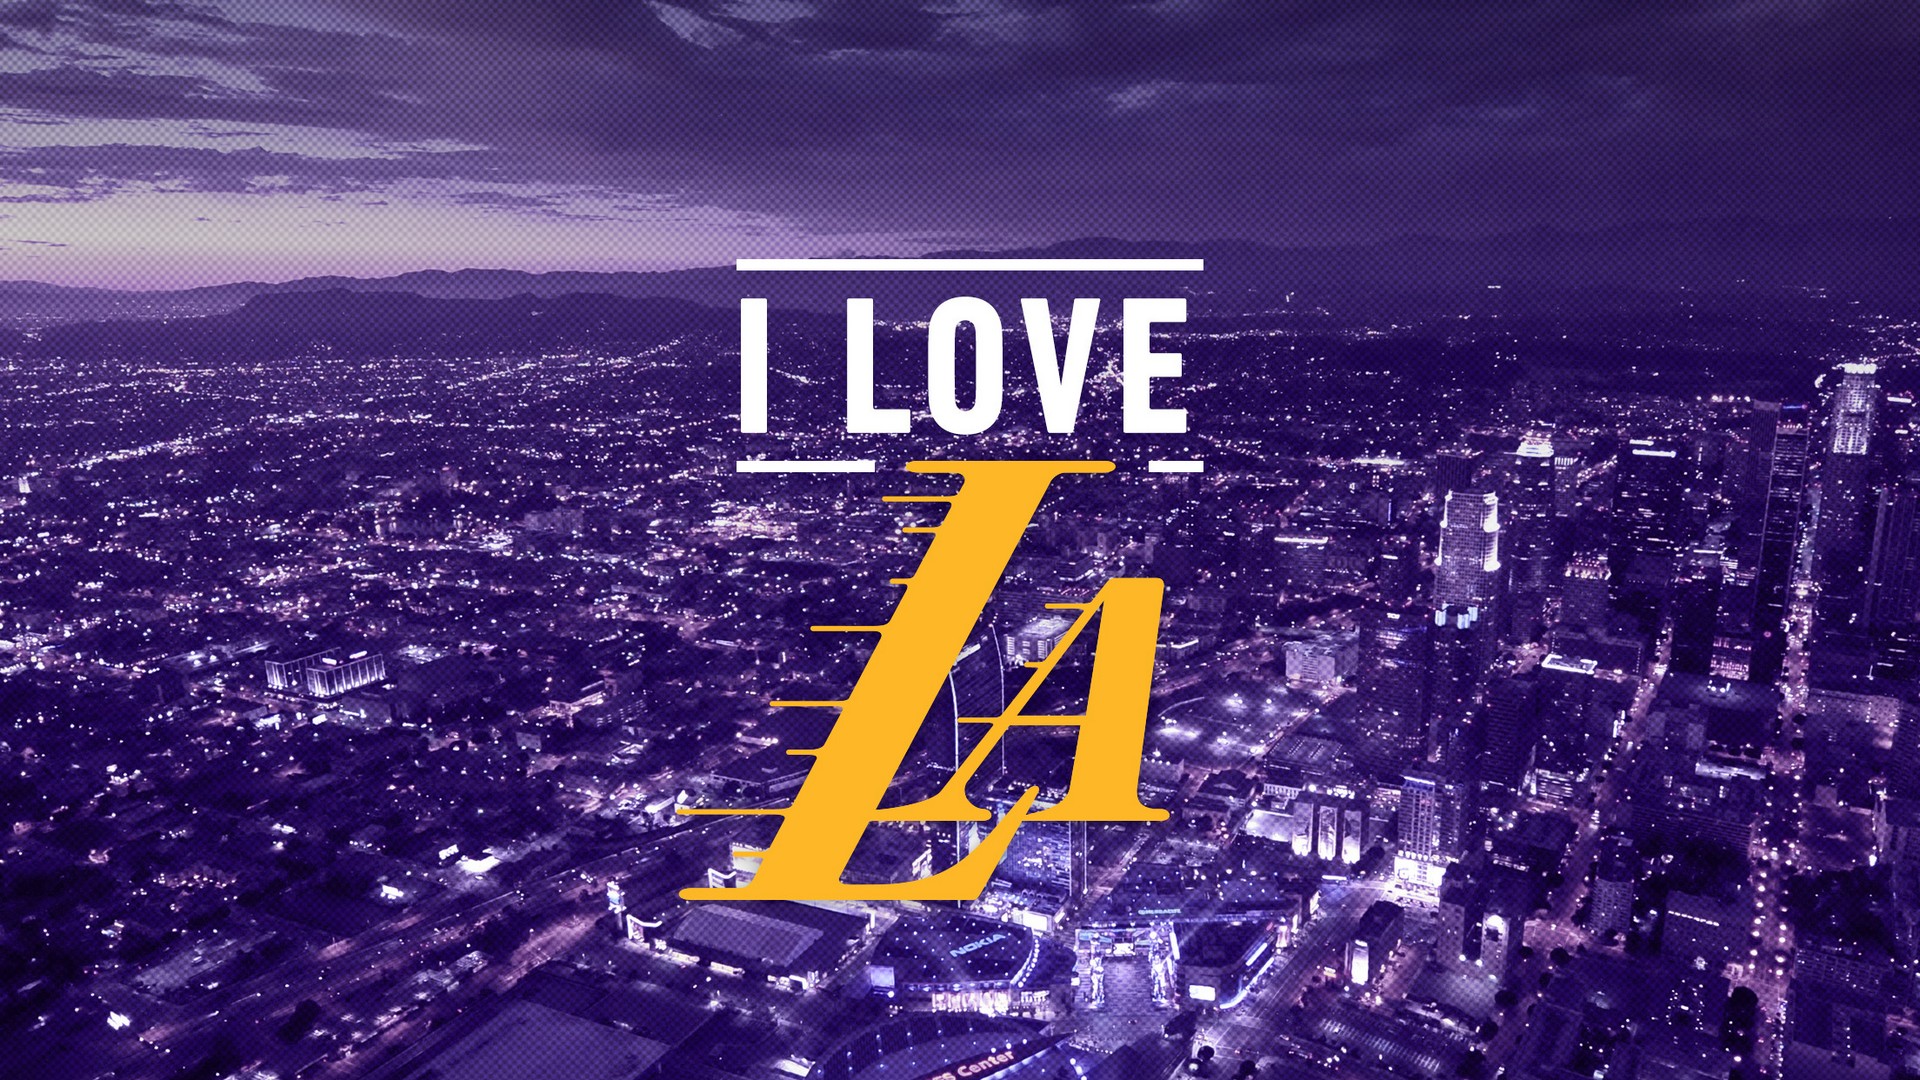 HD Desktop Wallpaper Los Angeles Lakers with image dimensions 1920x1080 pixel. You can make this wallpaper for your Desktop Computer Backgrounds, Windows or Mac Screensavers, iPhone Lock screen, Tablet or Android and another Mobile Phone device